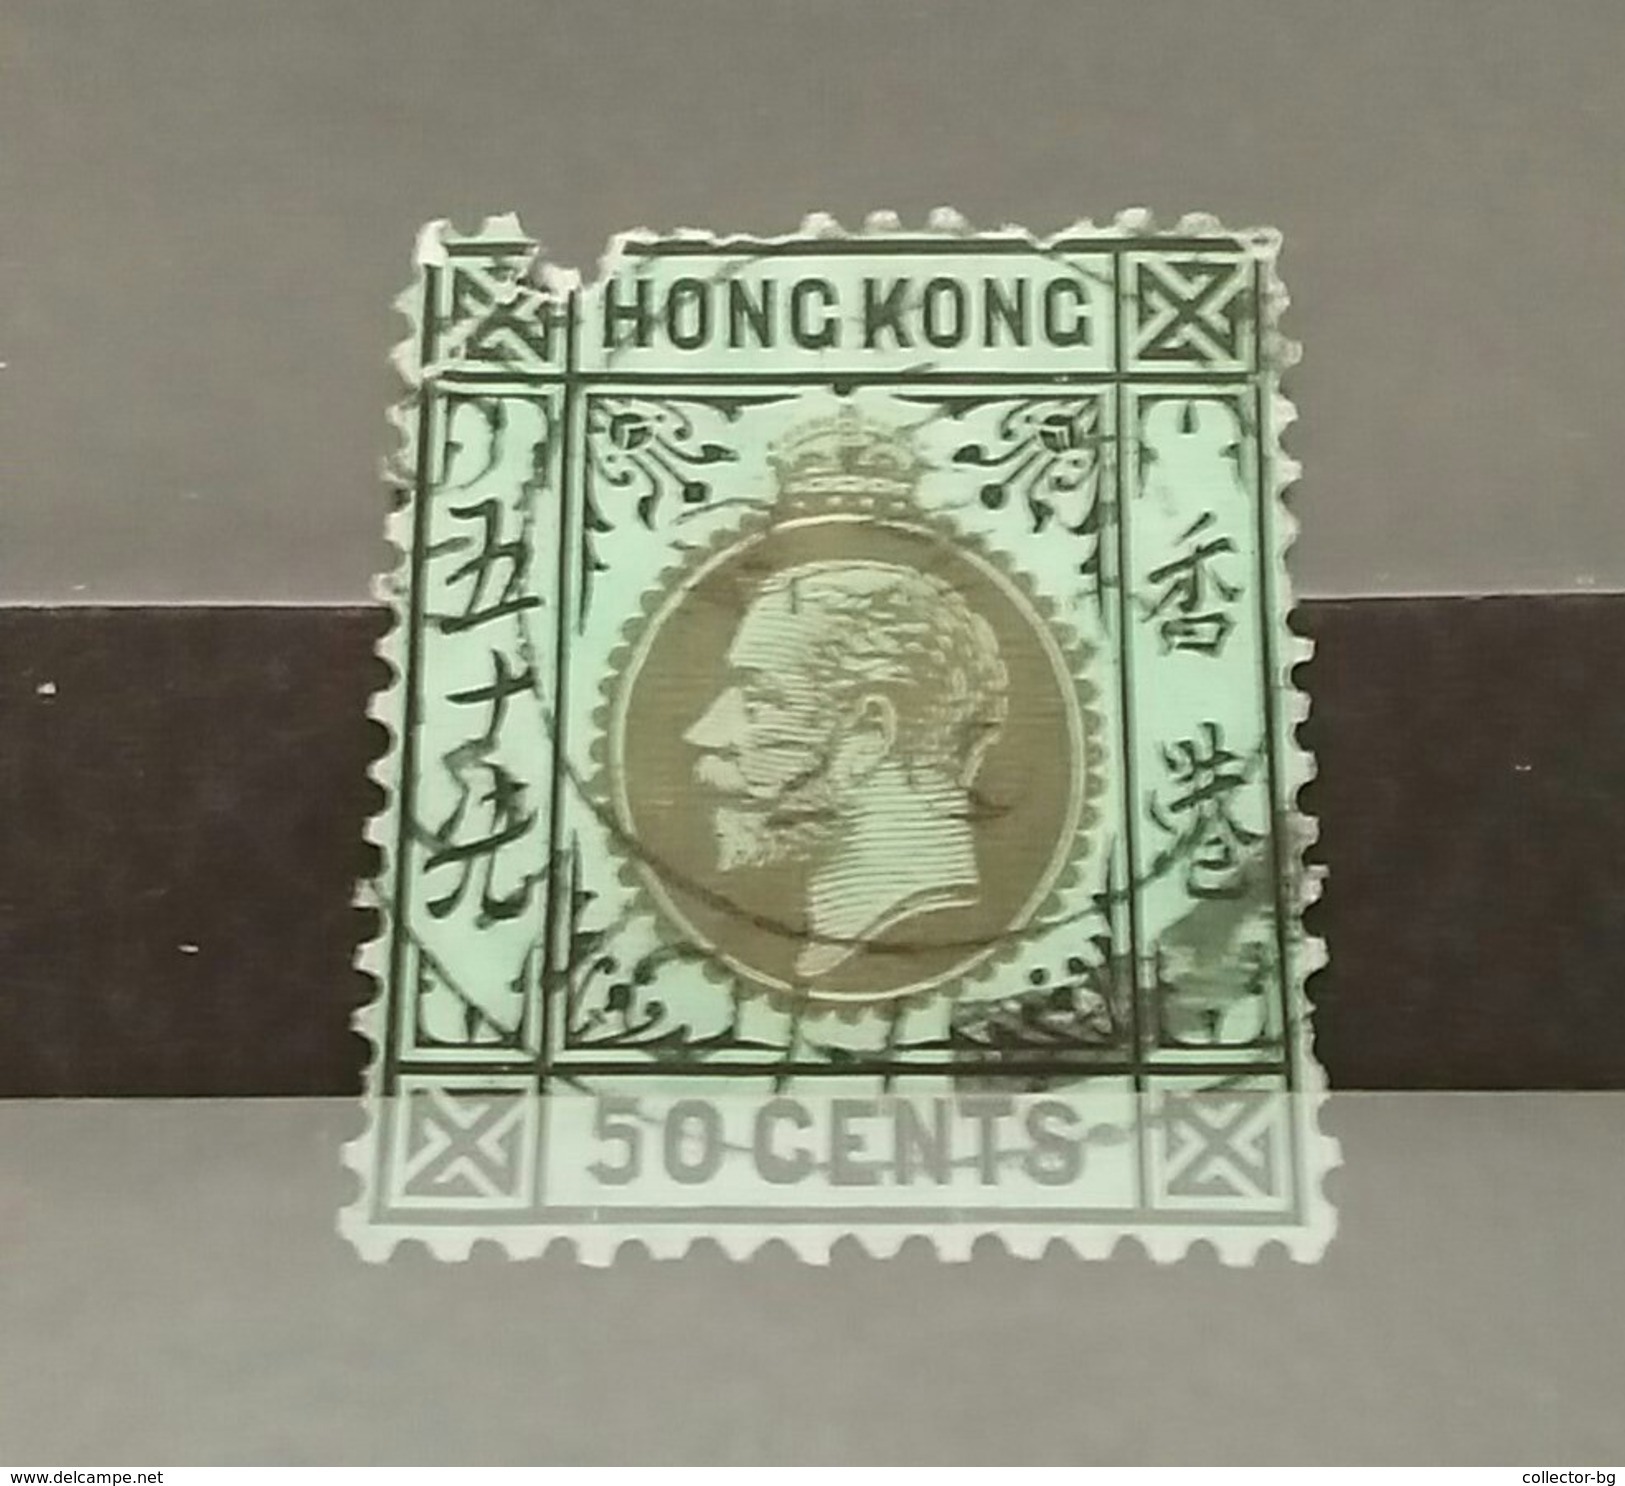 RARE  50C CENTS HONG KONG GREAT BRITAIN COLONIES ED VII 1923 USED STAMP TIMBRE - Oblitérés